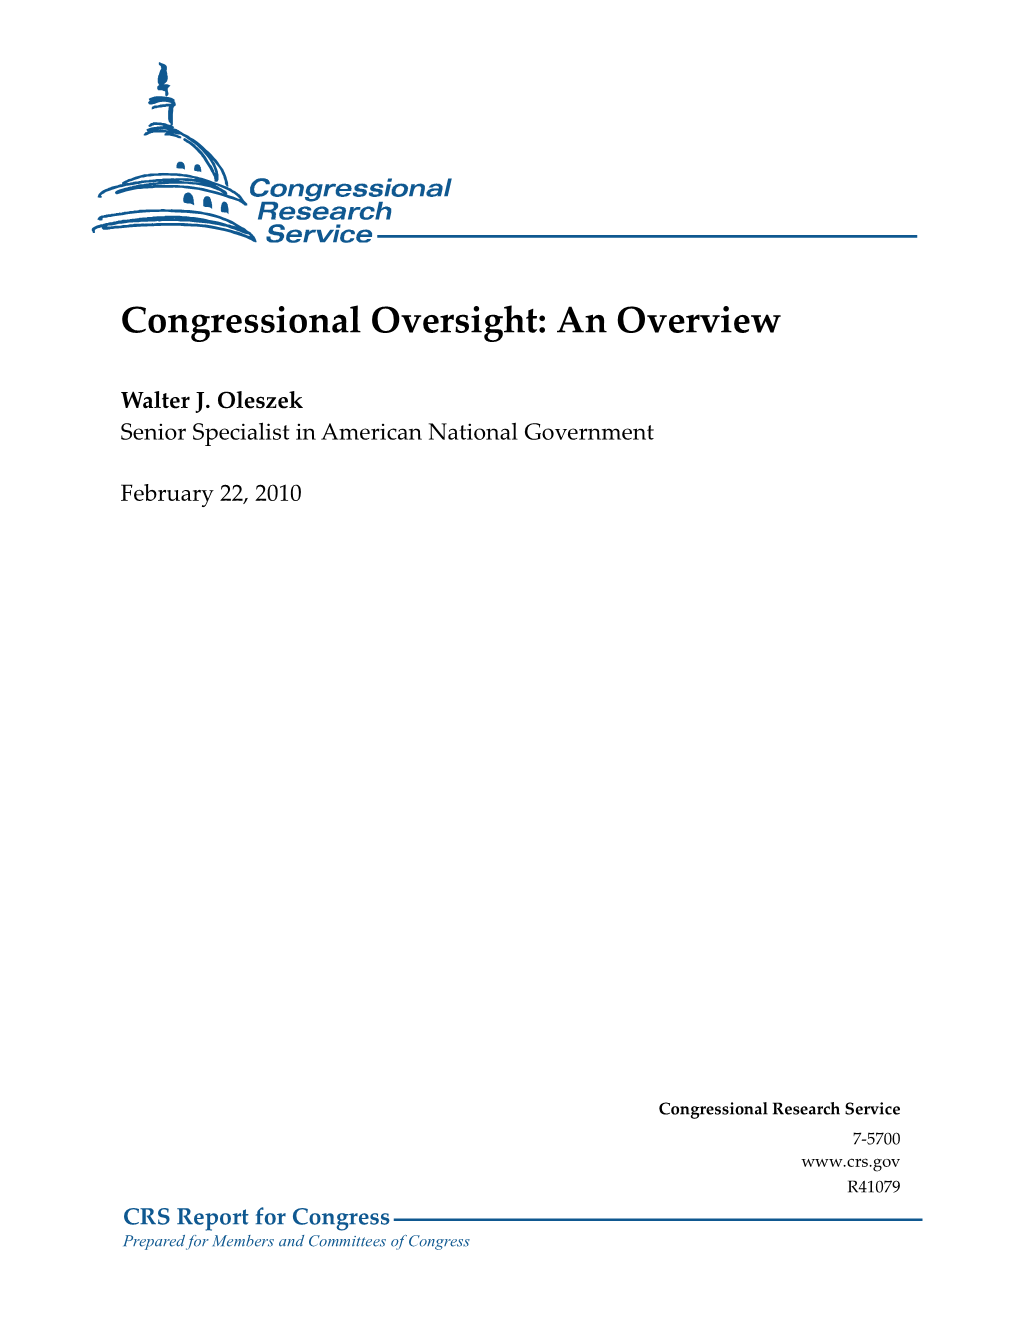 Congressional Oversight: an Overview